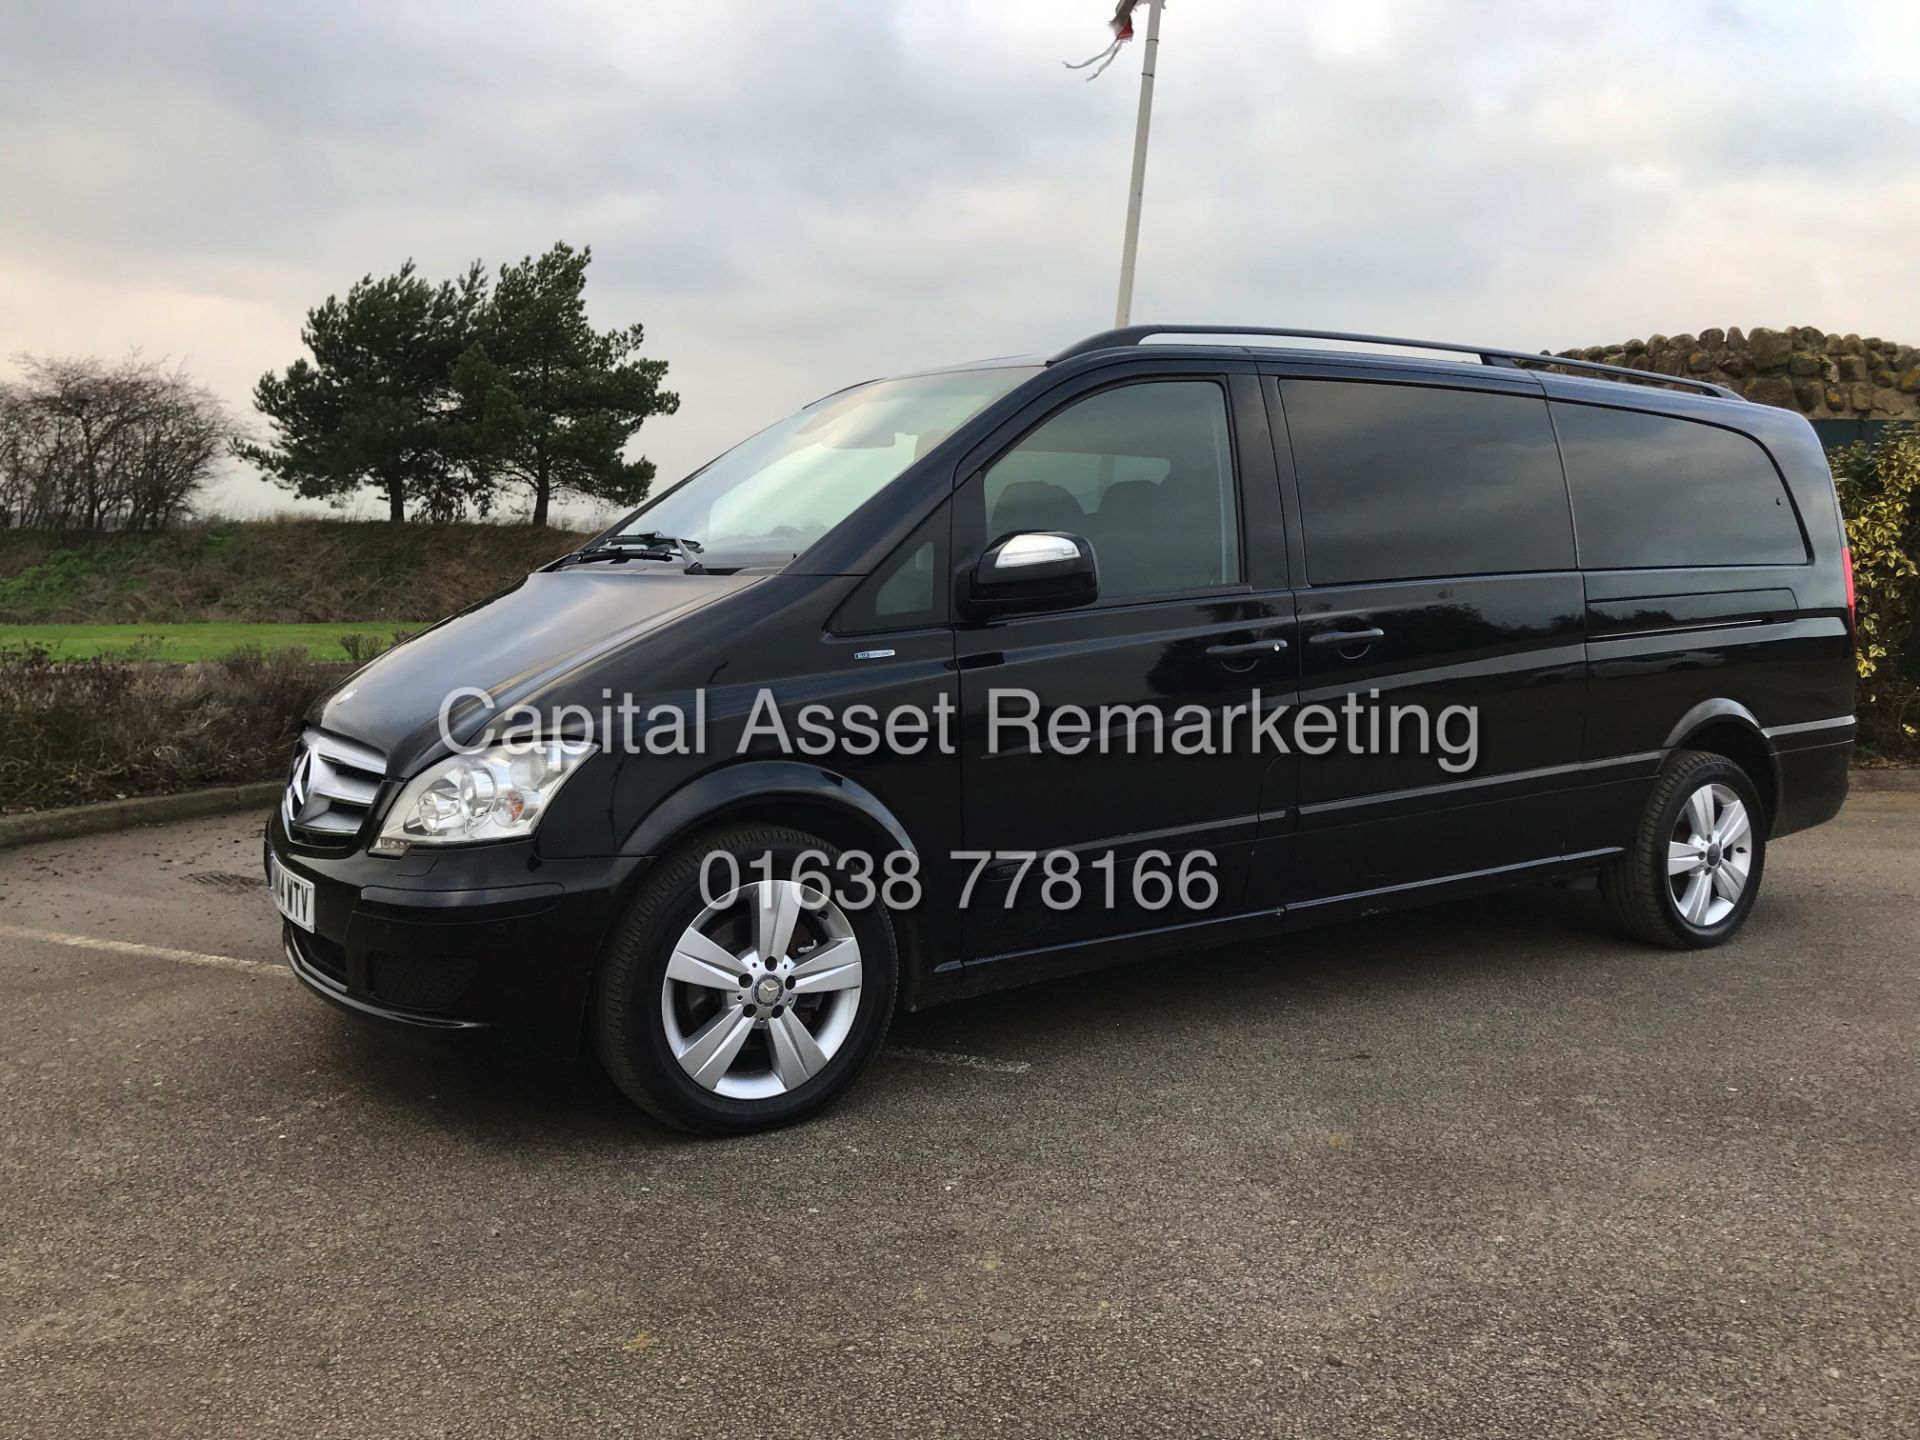 (ON SALE) MERCEDES VIANO 2.2CDI "AMBIENET" XLWB 8 SEATER (14 REG) 1 OWNER - FULLY LOADED - LEATHER